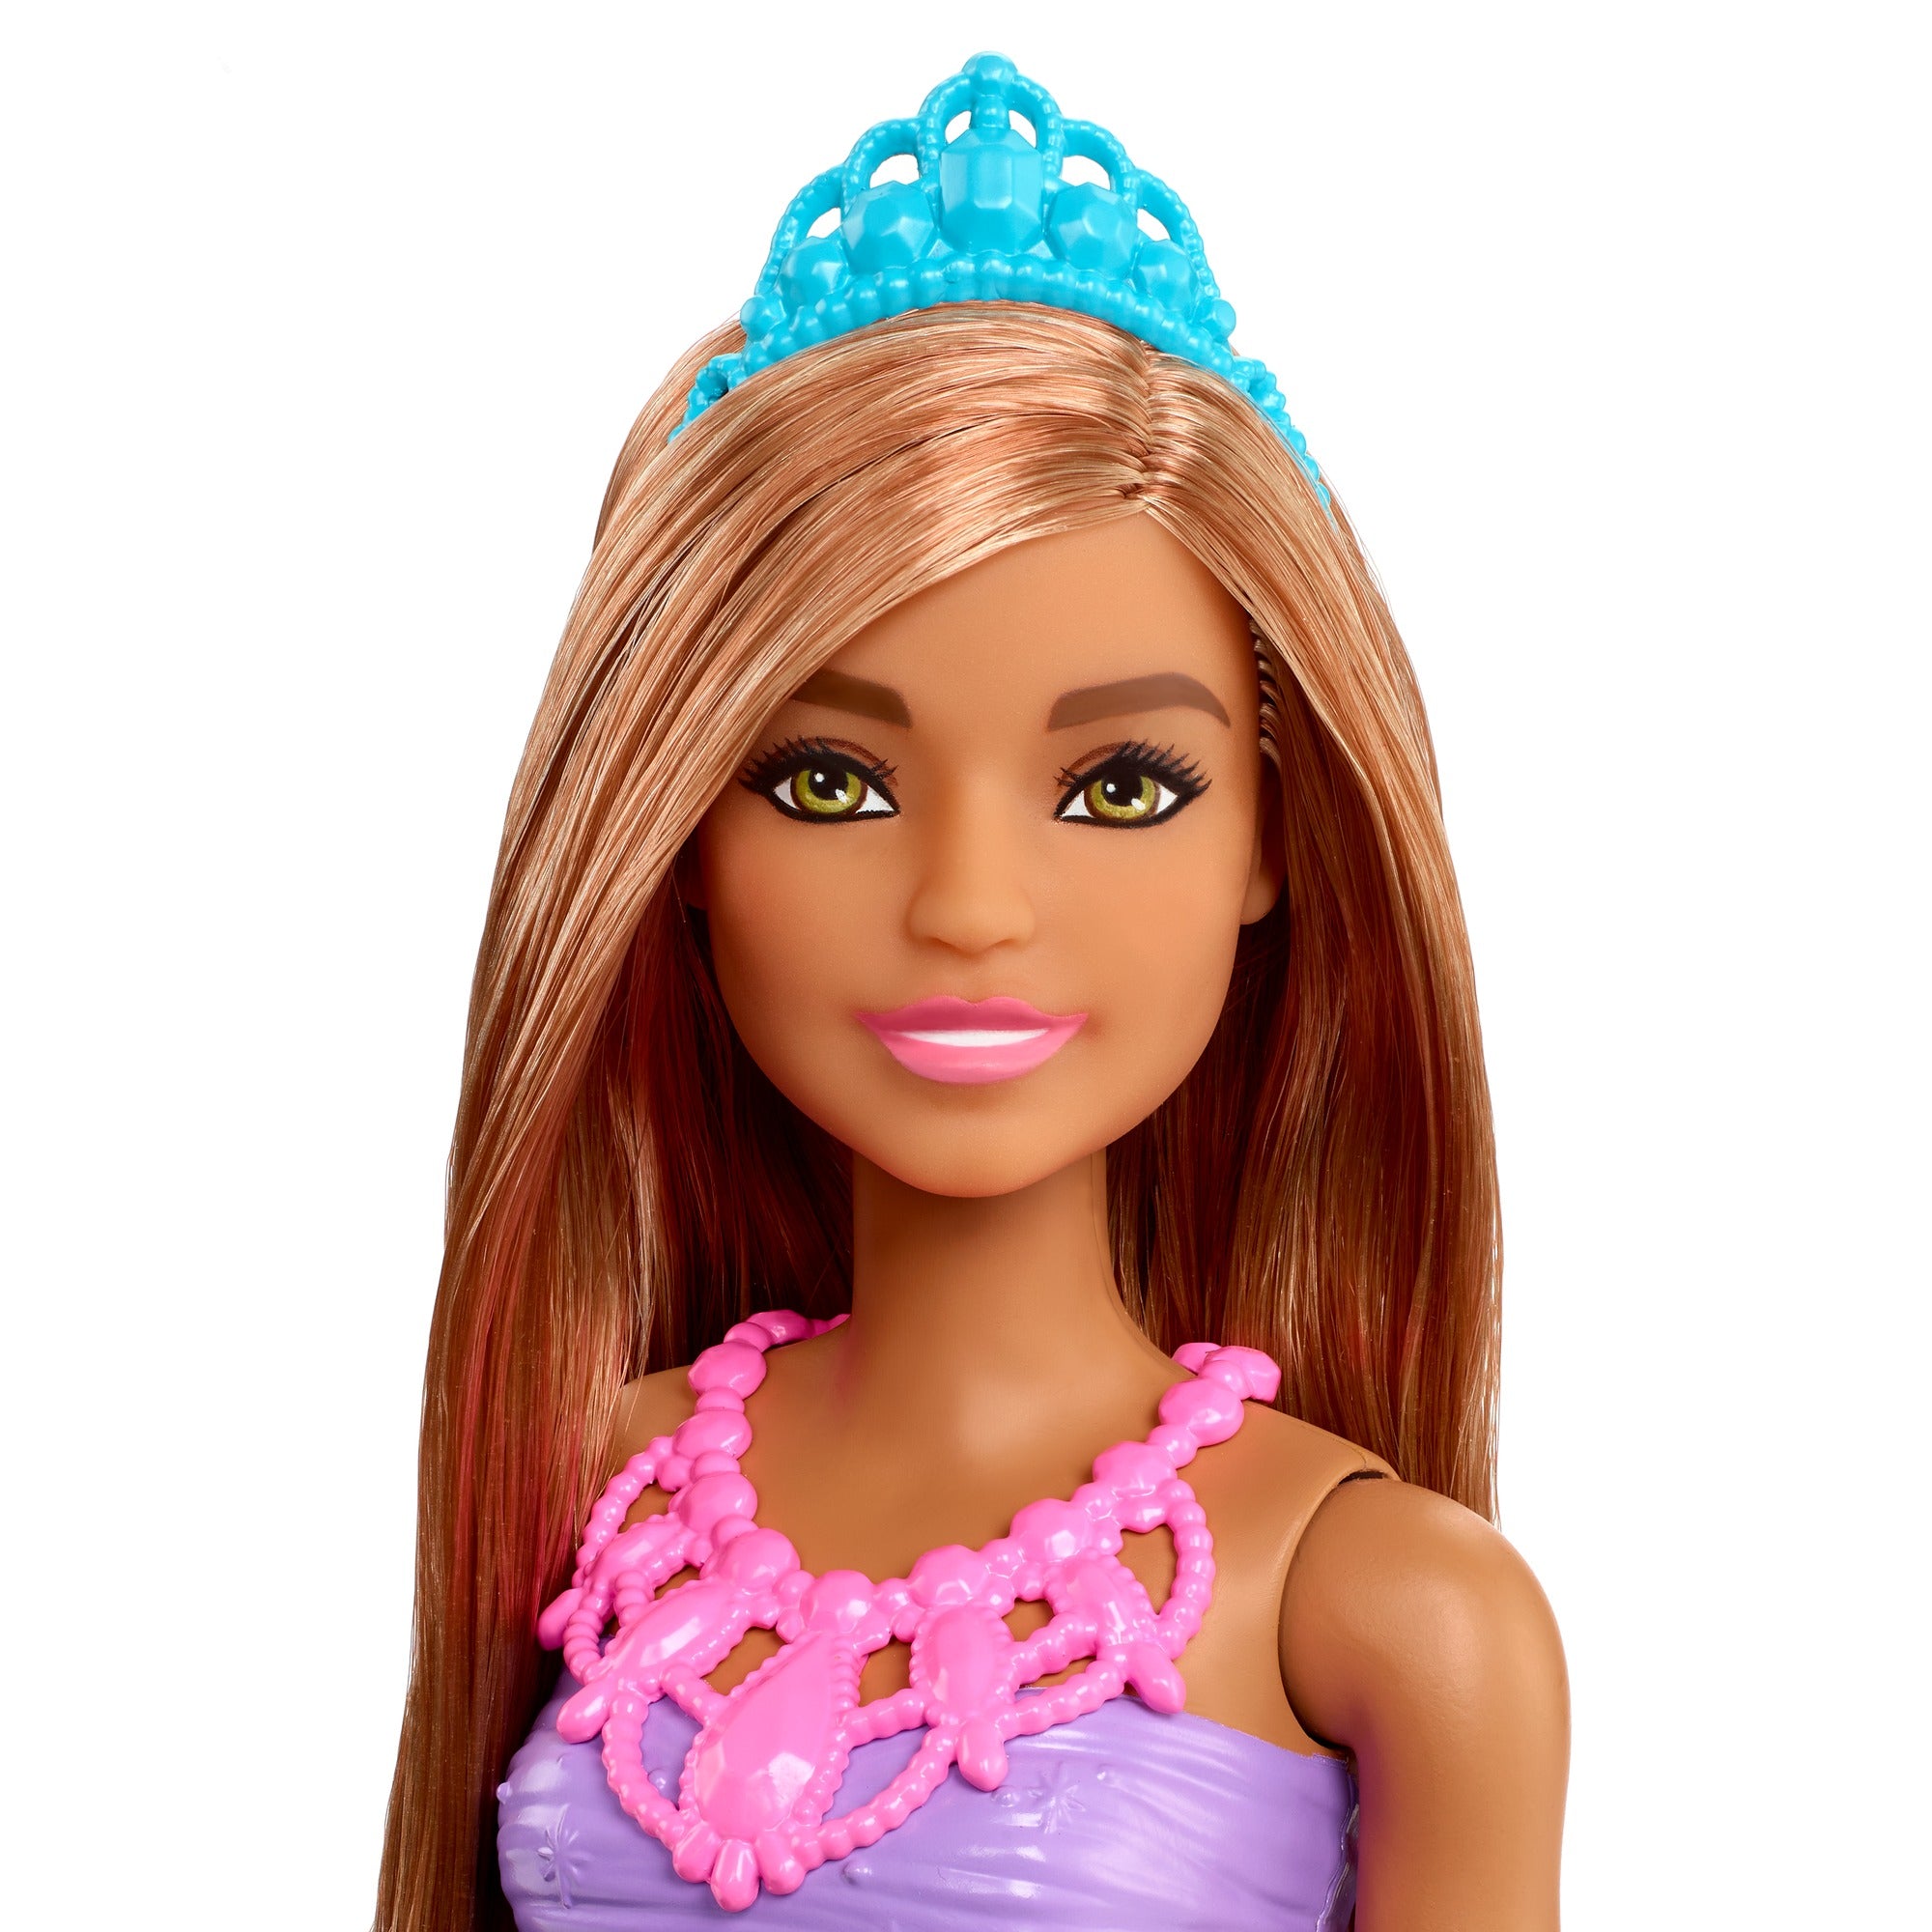 Barbie Dreamtopia Princess Brunette Doll Wearing Blue Skirt, Shoes and Tiara for Kids Ages 3+